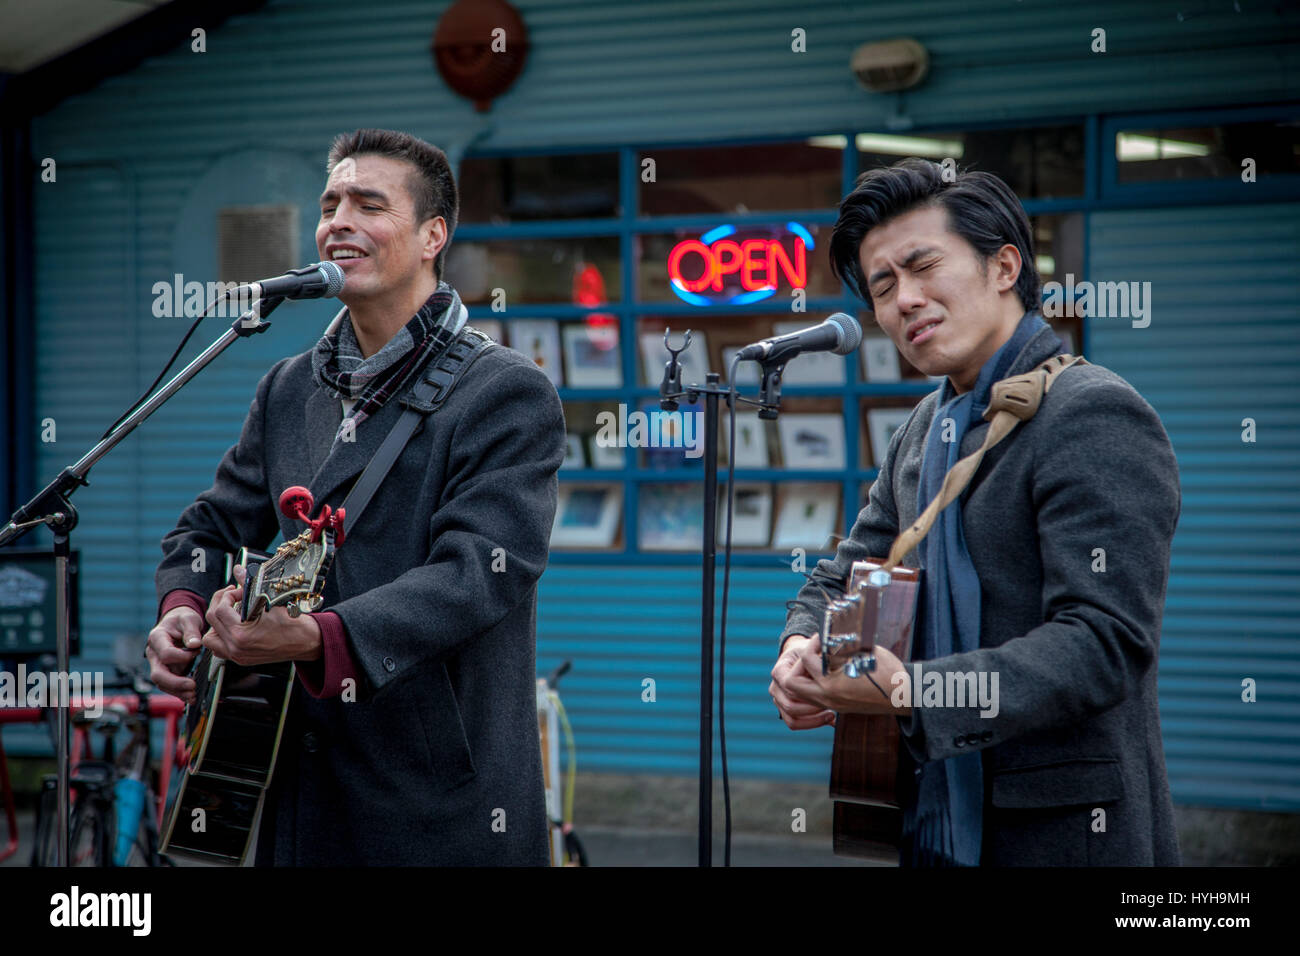 Young guitarists and singer performing outdoors, Granville Island, Vancouver, British Columbia, Canada Stock Photo